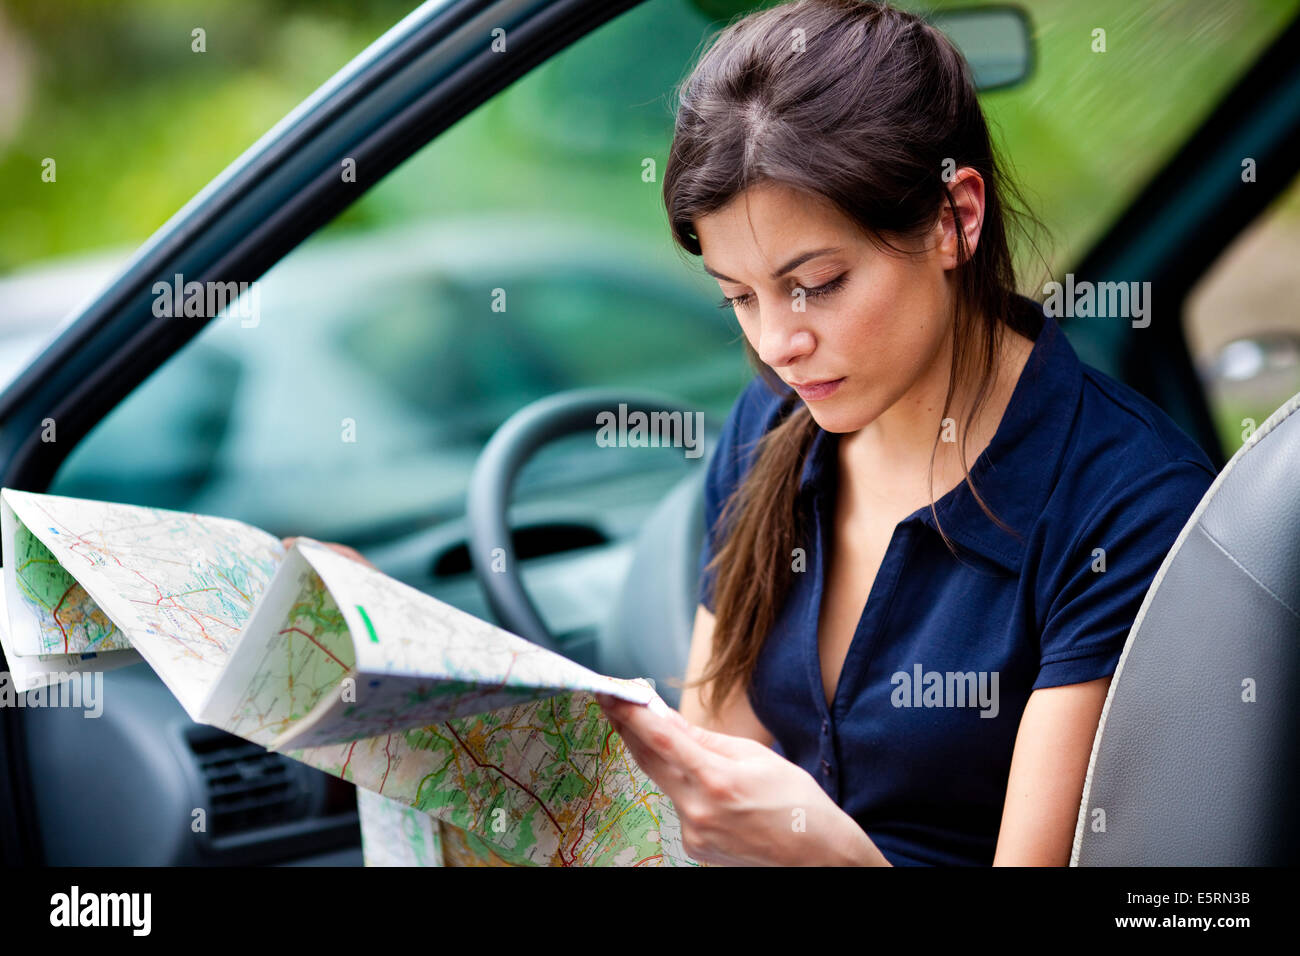 Woman driver reading a road map. Stock Photo